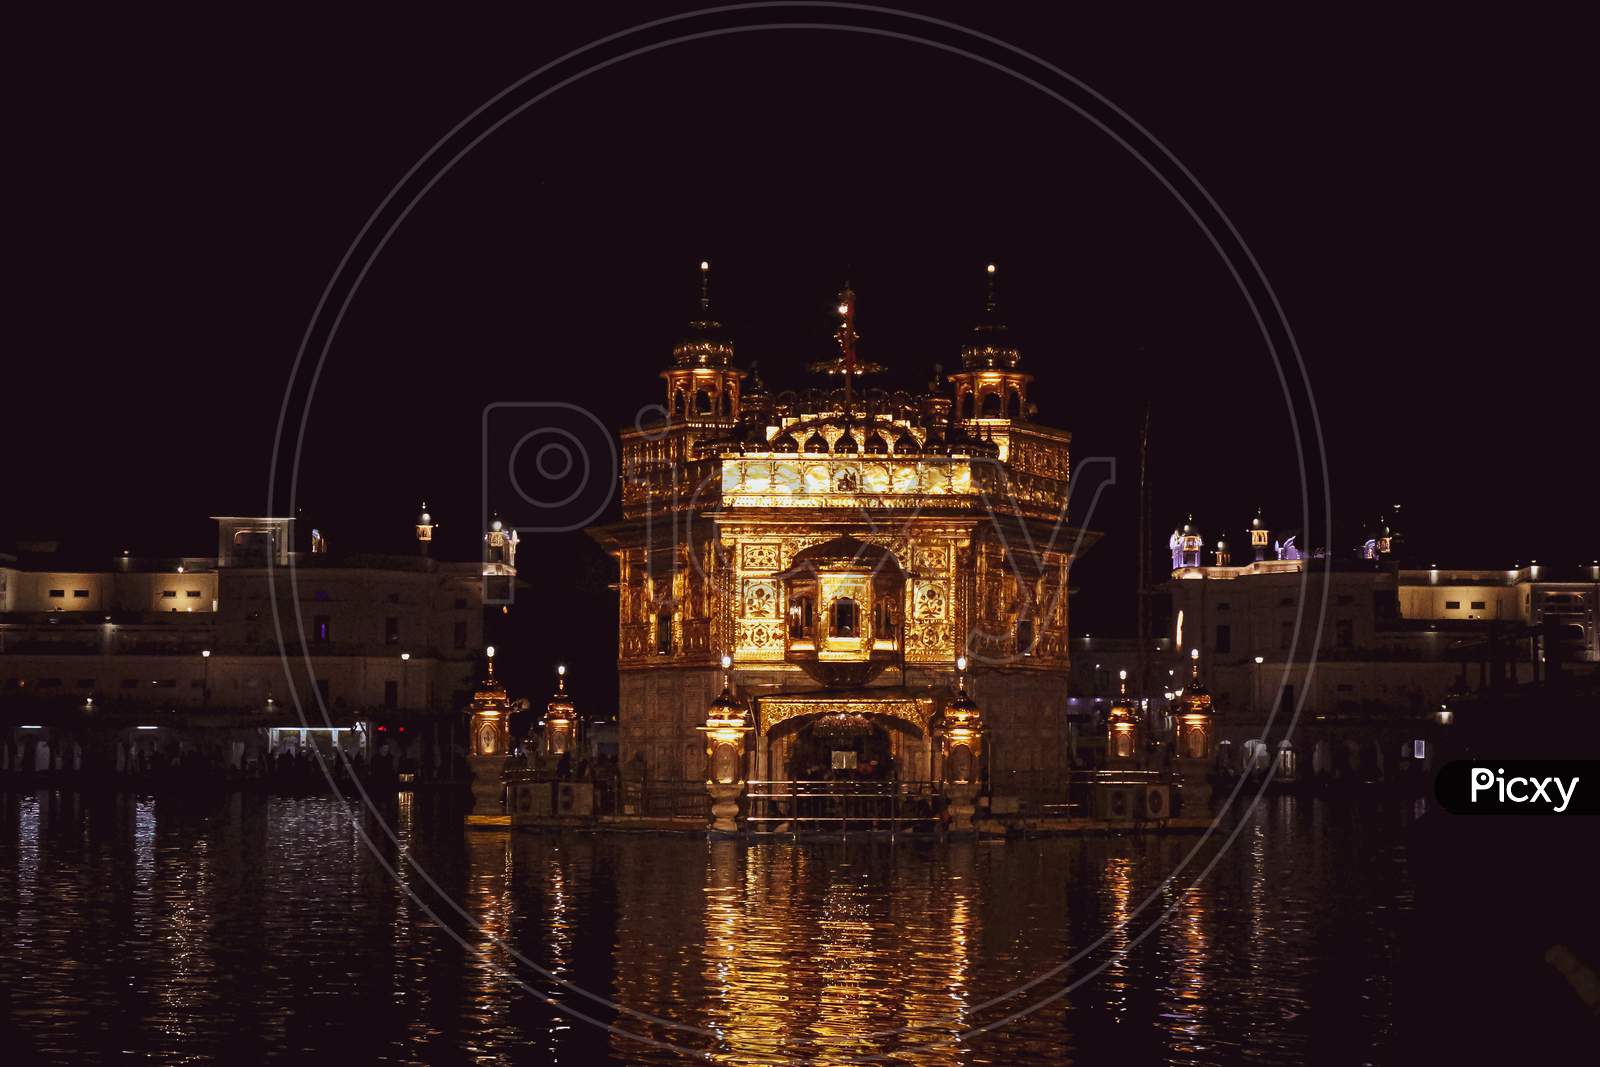 Golden temple during night